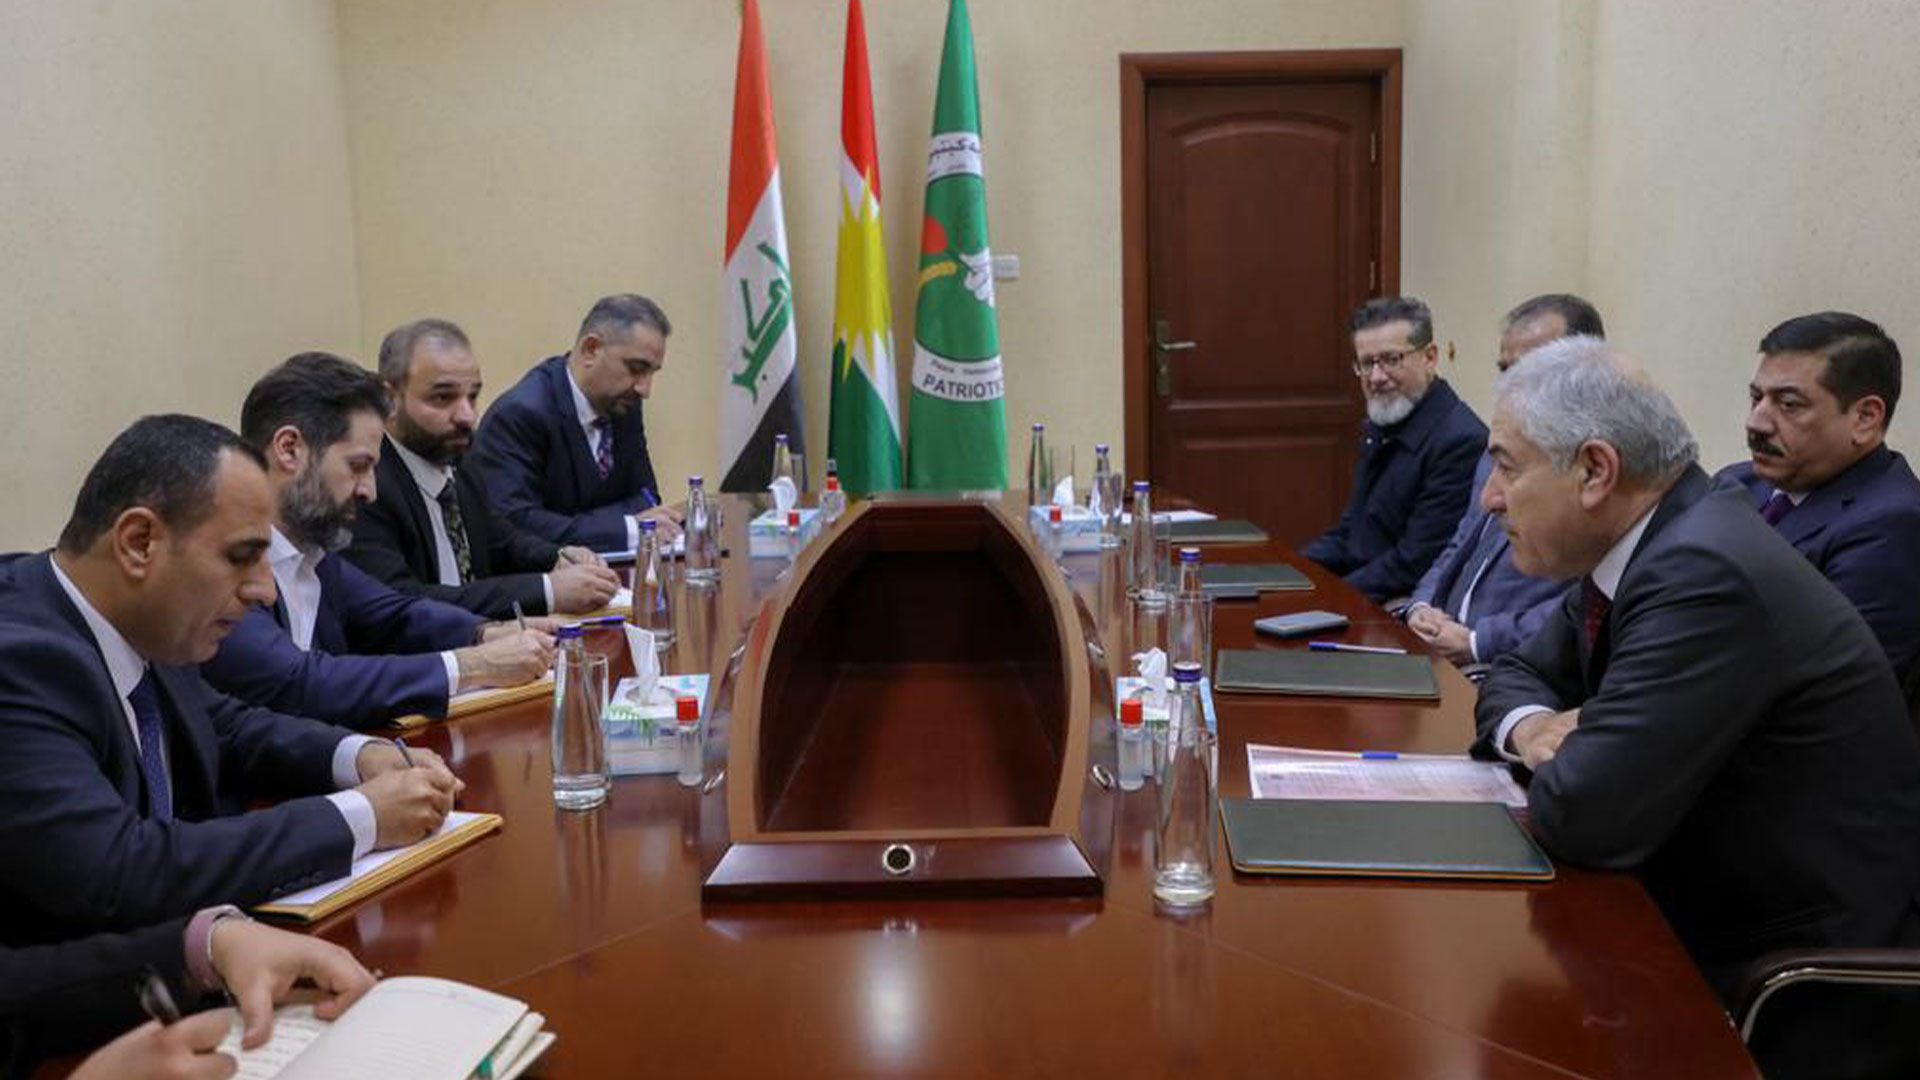  Qubad Talabani in Kirkuk meets with the committee of implementing Article 140.